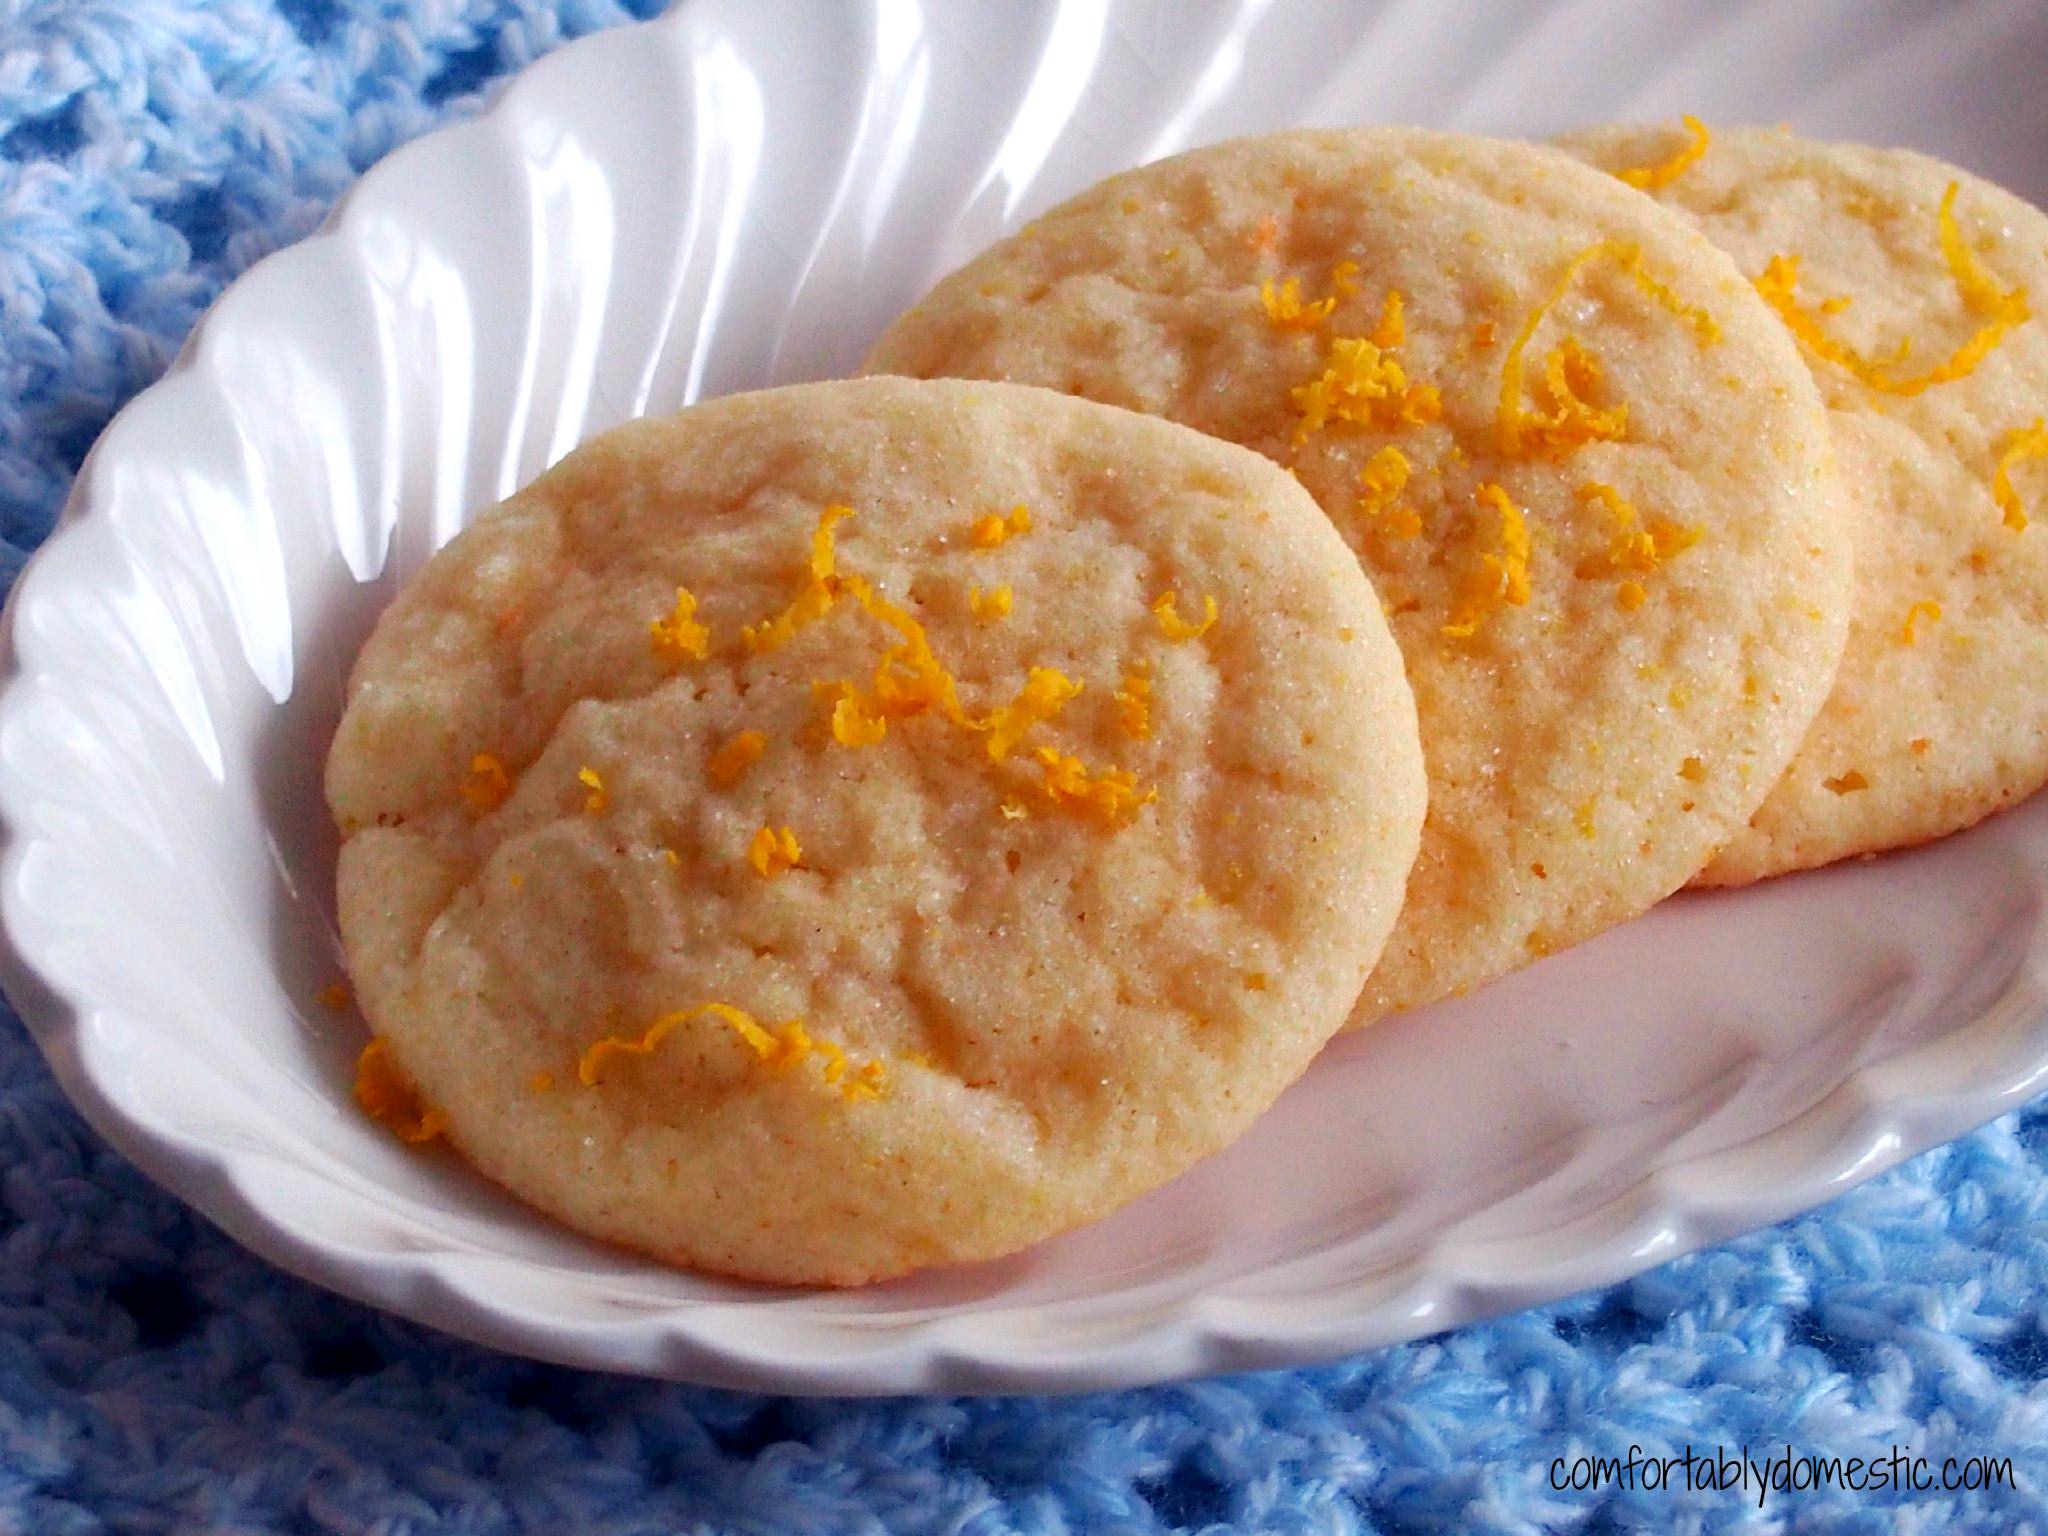 Lemon Doodles are the perfect balance between a chewy, light lemon cookie and soft lemon cake. Tangy and sweet, with a crunchy lemon sugar topping, these cookies are the ultimate treat! | ComfortablyDomestic.com